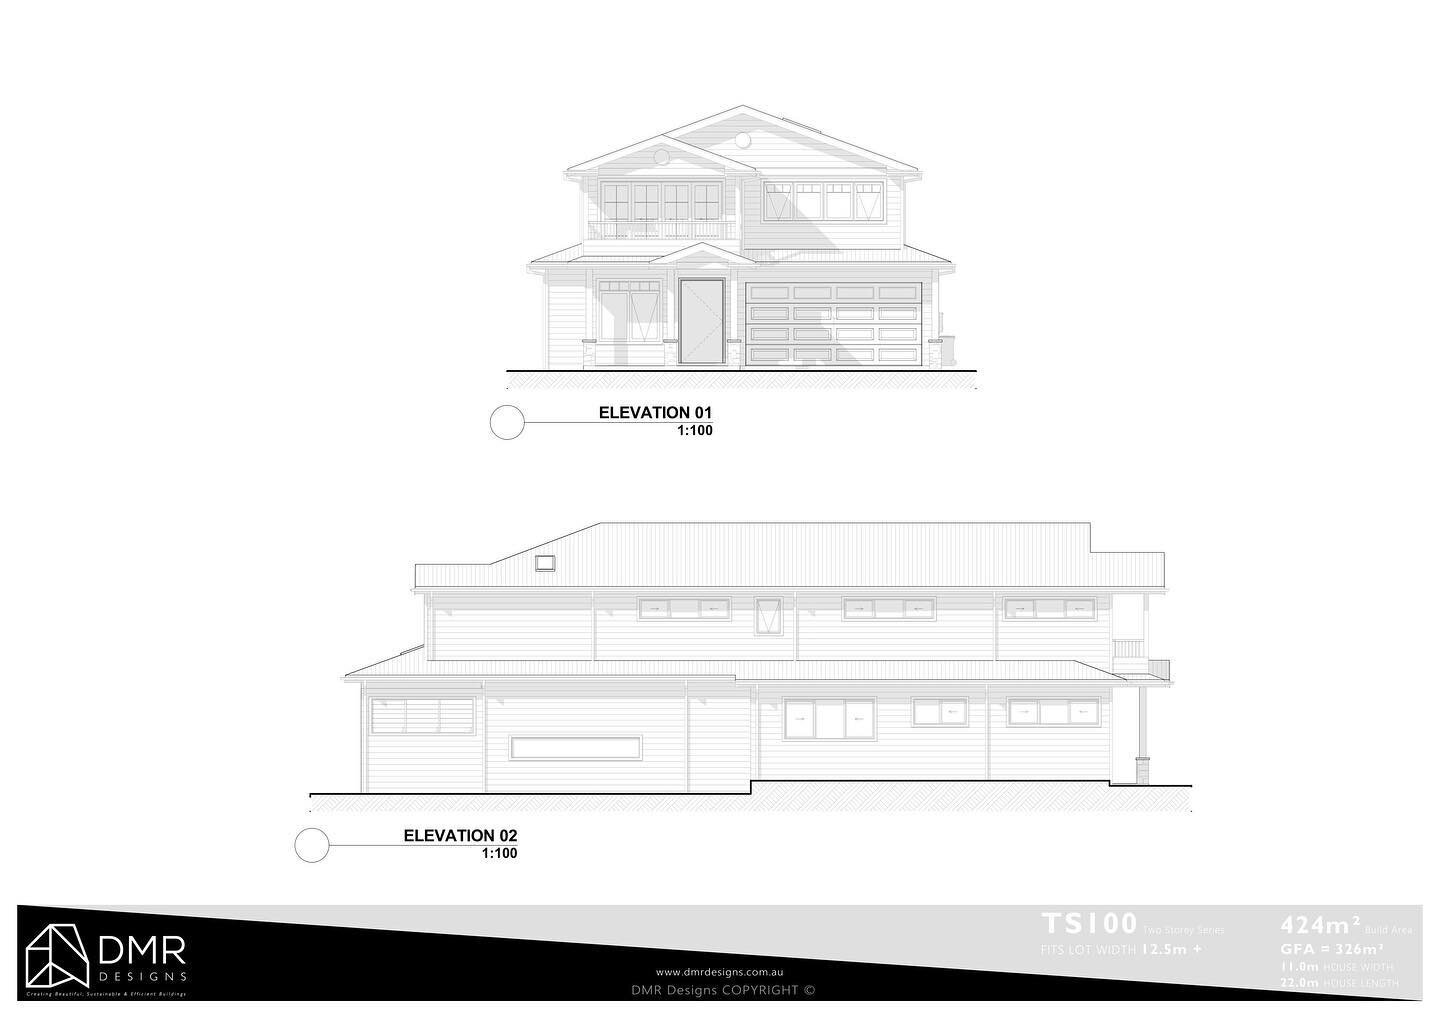 Concept Plans for our new 424m2 Custom Design Two Storey Home coming soon to Mona Vale..✏️ 🏡 🌳 ☀️ 

▪️5 Bedrooms &amp; 4 Bathrooms 
▪️Open Plan Family / Dining / Kitchen
▪️Media Room
▪️Rumpus Room
▪️Butler Pantry
▪️Seperate Study 
▪️Covered Alfresc